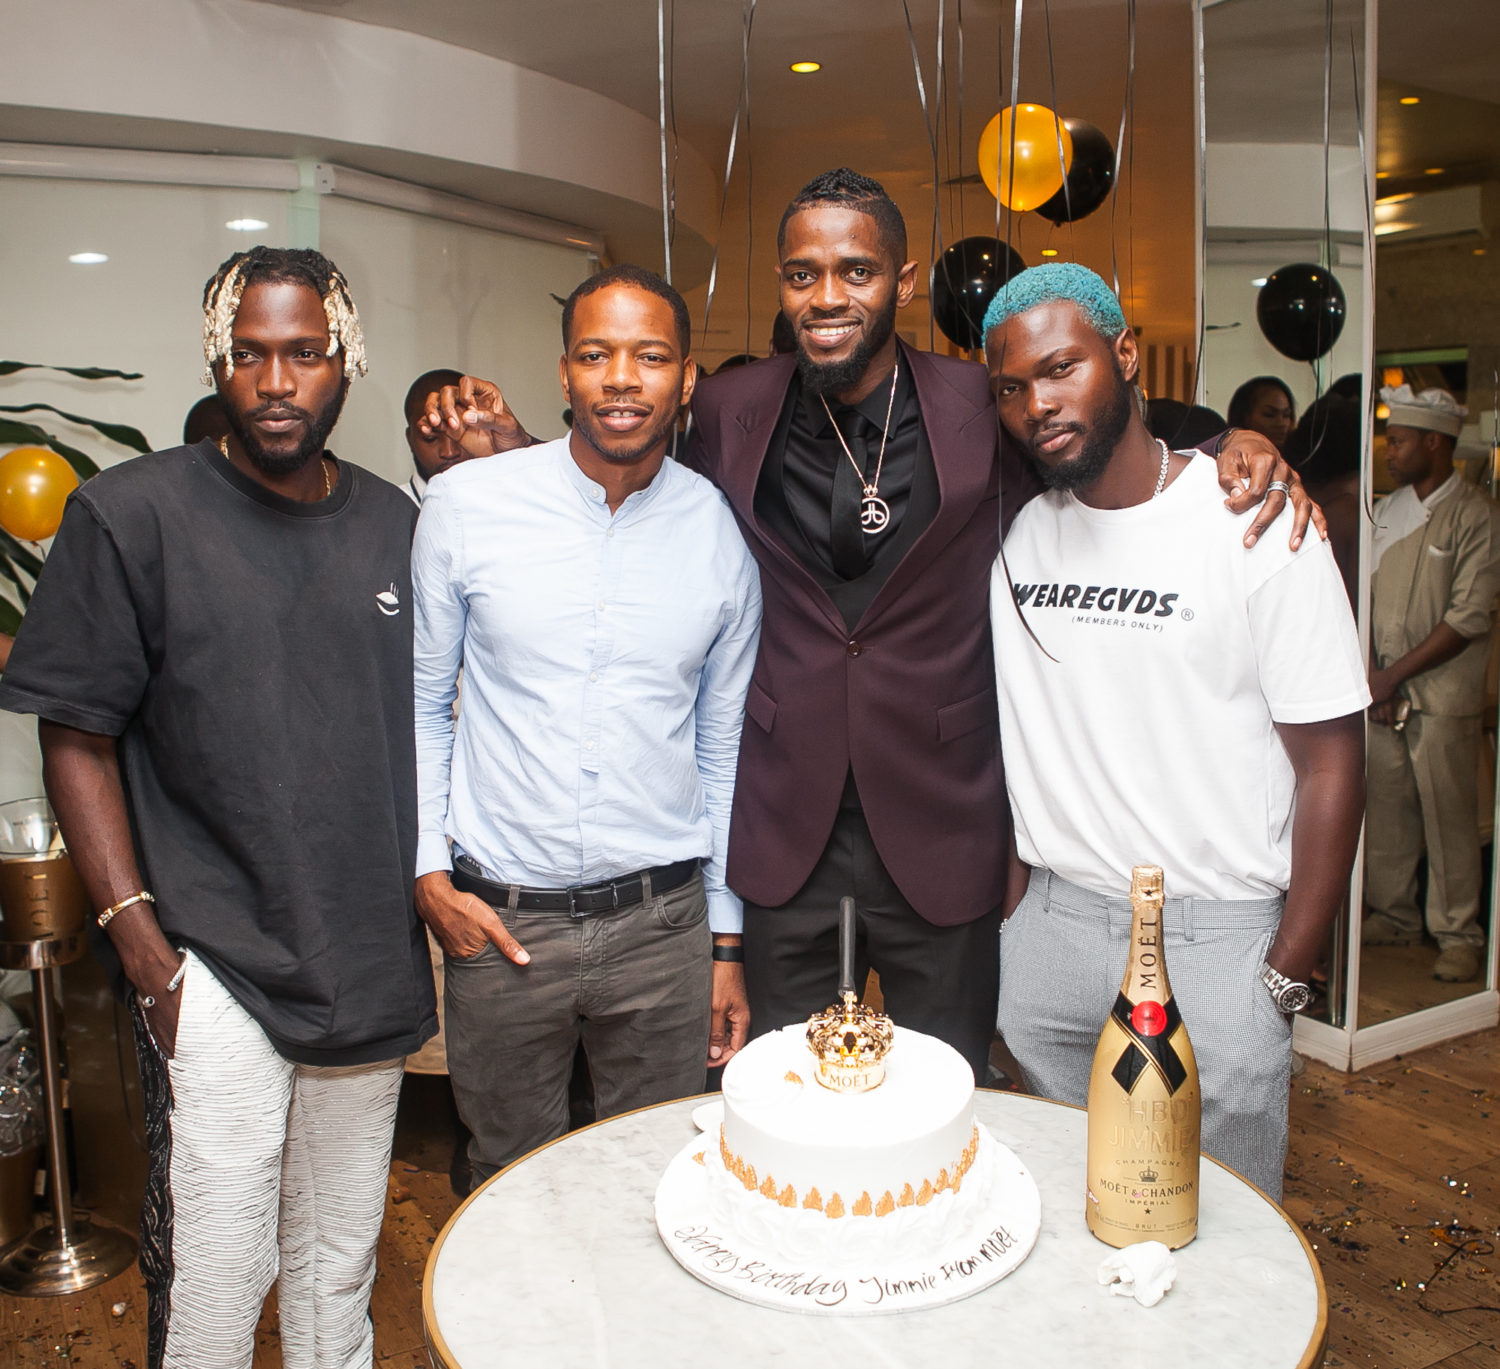 All the Impossibly Chic #MoëtMoments From Jimmie Akinsola’s ‘Black Excellence’ Bash